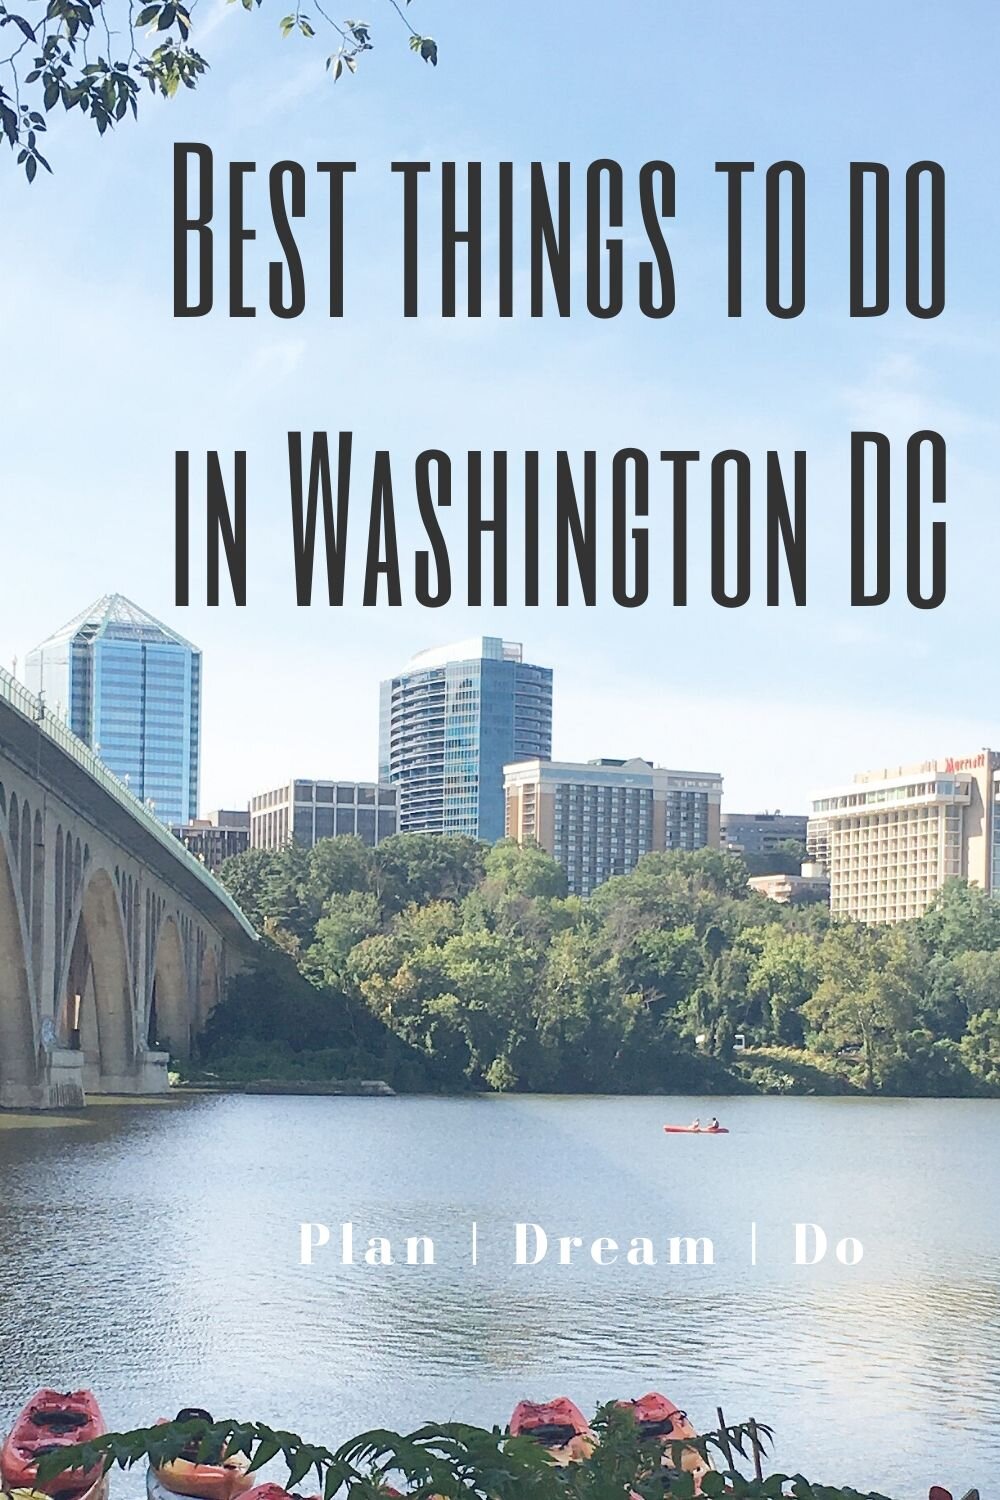 Once known best for monuments and museums, the White House and the Capitol; Washington DC has so much to see and do. There are lots of free things to do in Washington DC along with so many bike trails in Washington DC. Read on for must sees in Washi…